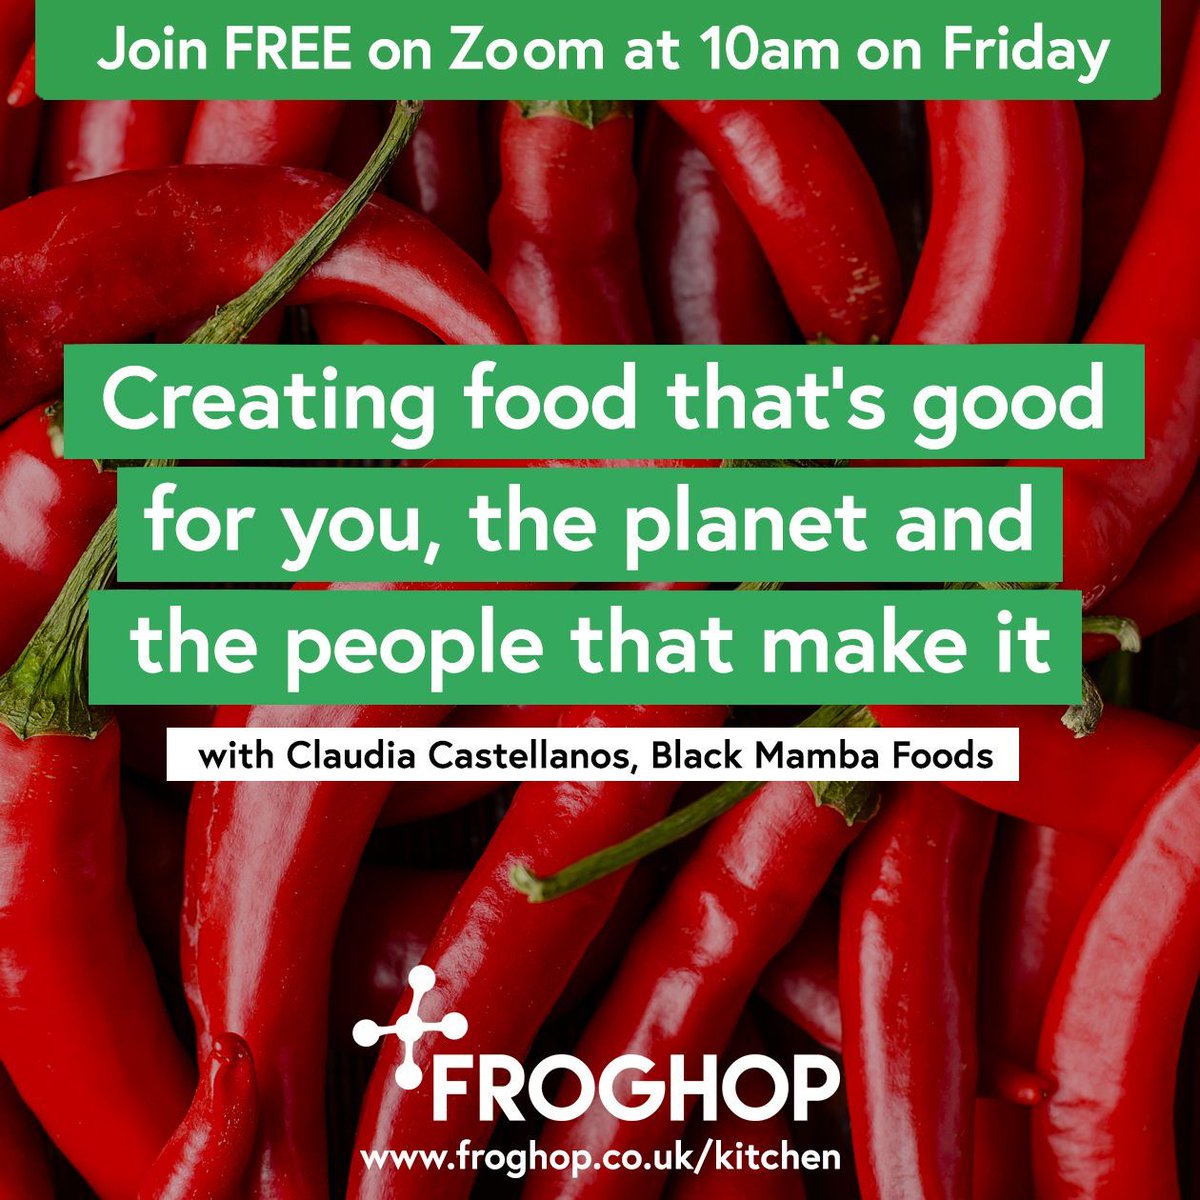 How to build a food business creates products that are good for you, the planet and the people that make them with Claudia from @blackmambafood 👉 buff.ly/3vDQPOh

#foodfounders #foodbusiness #greattasteaward #sustainablefood #sauces #foodbusiness